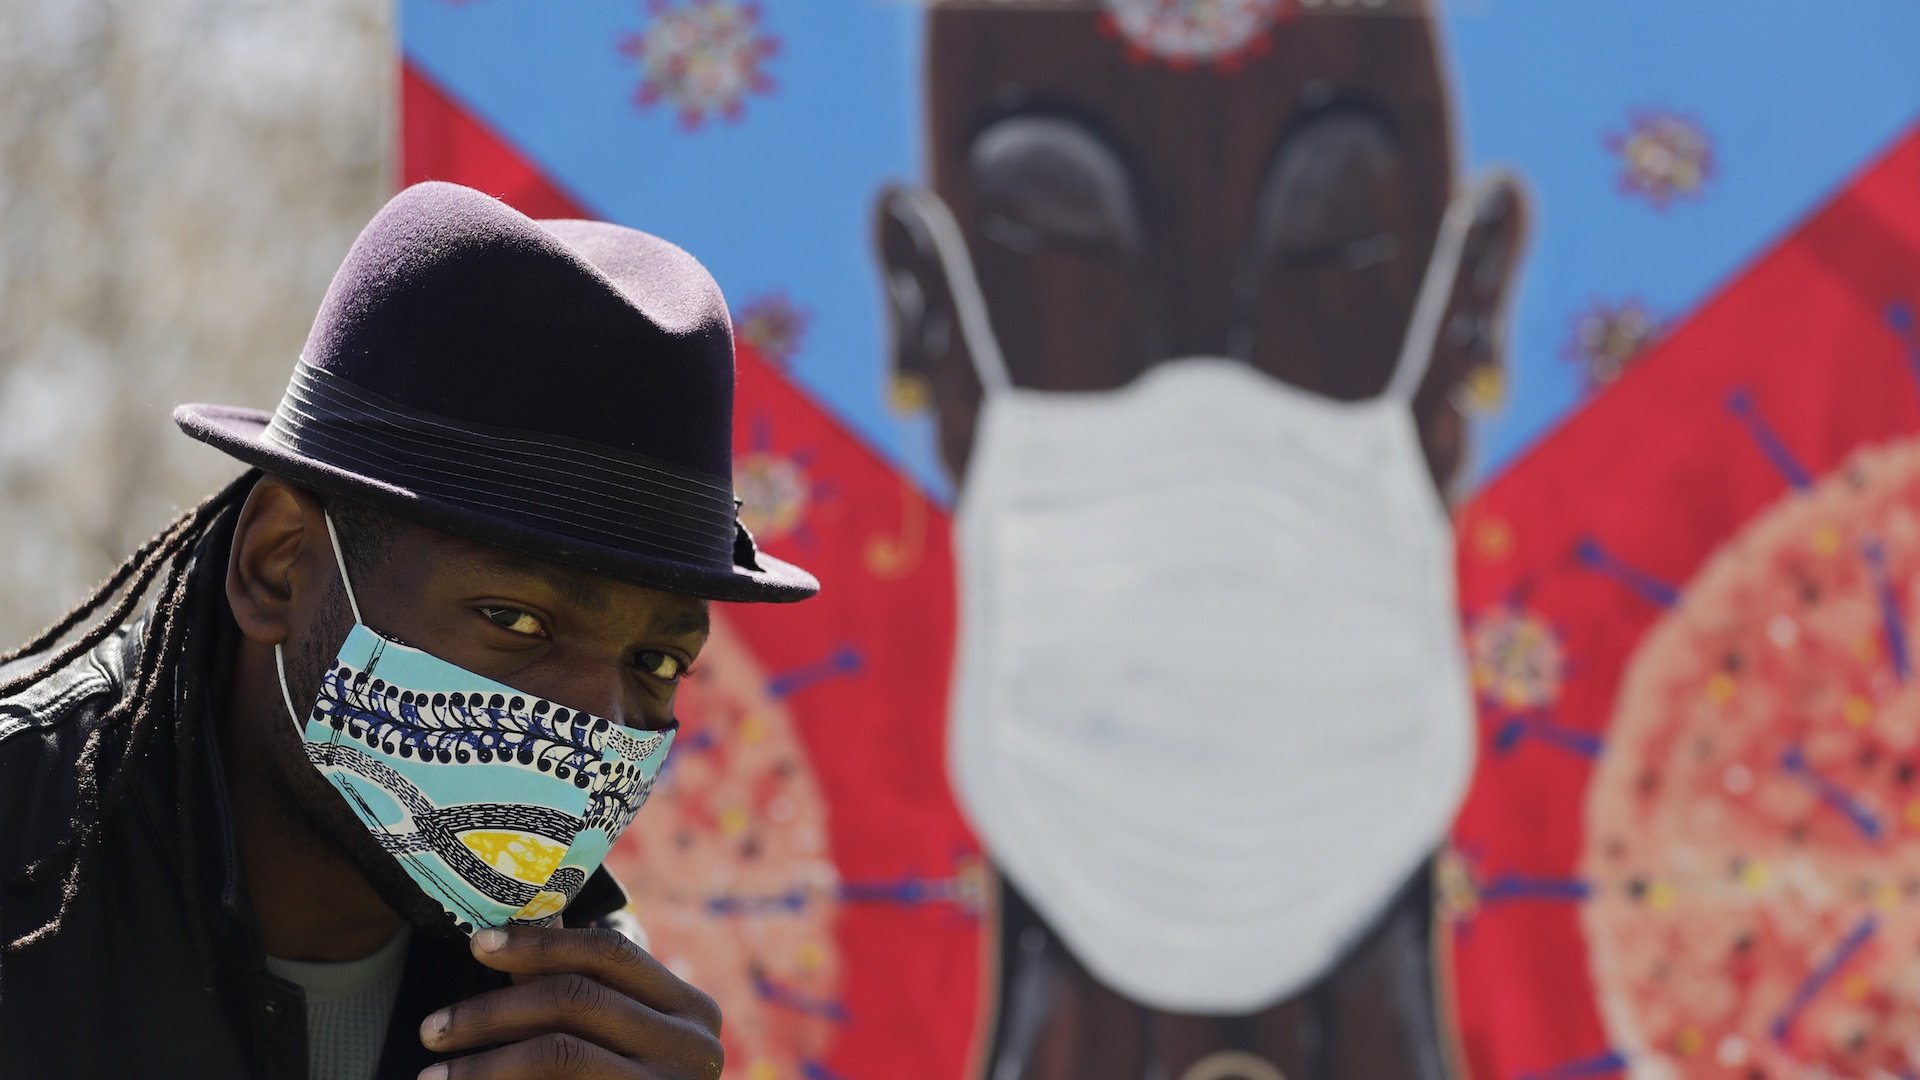 In this Tuesday, April 21, 2020 photo, Obi Uwakwe poses with his painting in Chicago. Uwakwe is an artist/photographer and submitted his art work to the the Illinois State Museum, which is documenting what daily life is like for Illinois families during the coronavirus pandemic. (AP Photo/Nam Y. Huh)